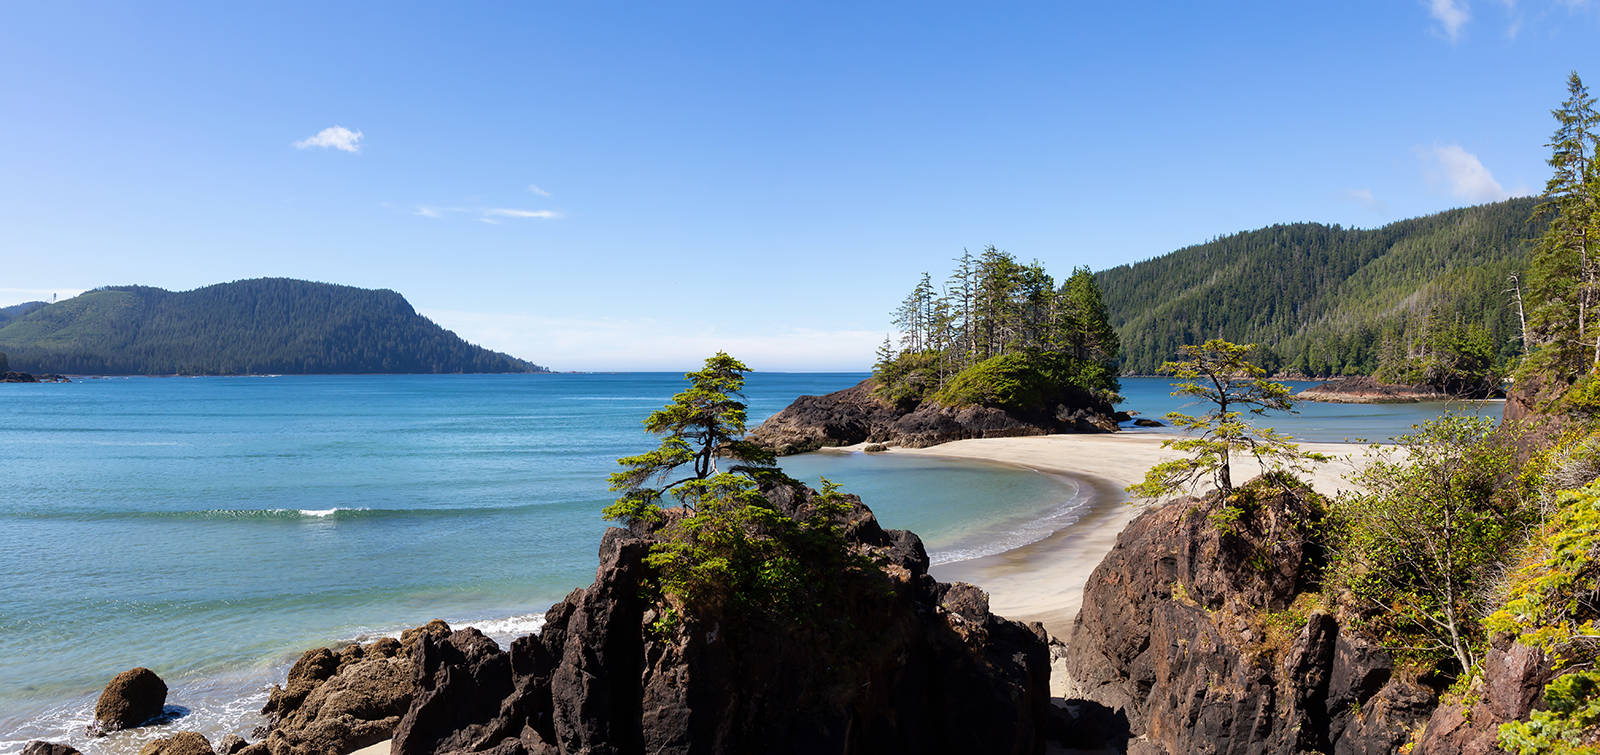 As Islanders continue to look for staycations, Cape Scott Provincial Park is proving to be high on peoples lists of where to getaway on Vancouver Island.